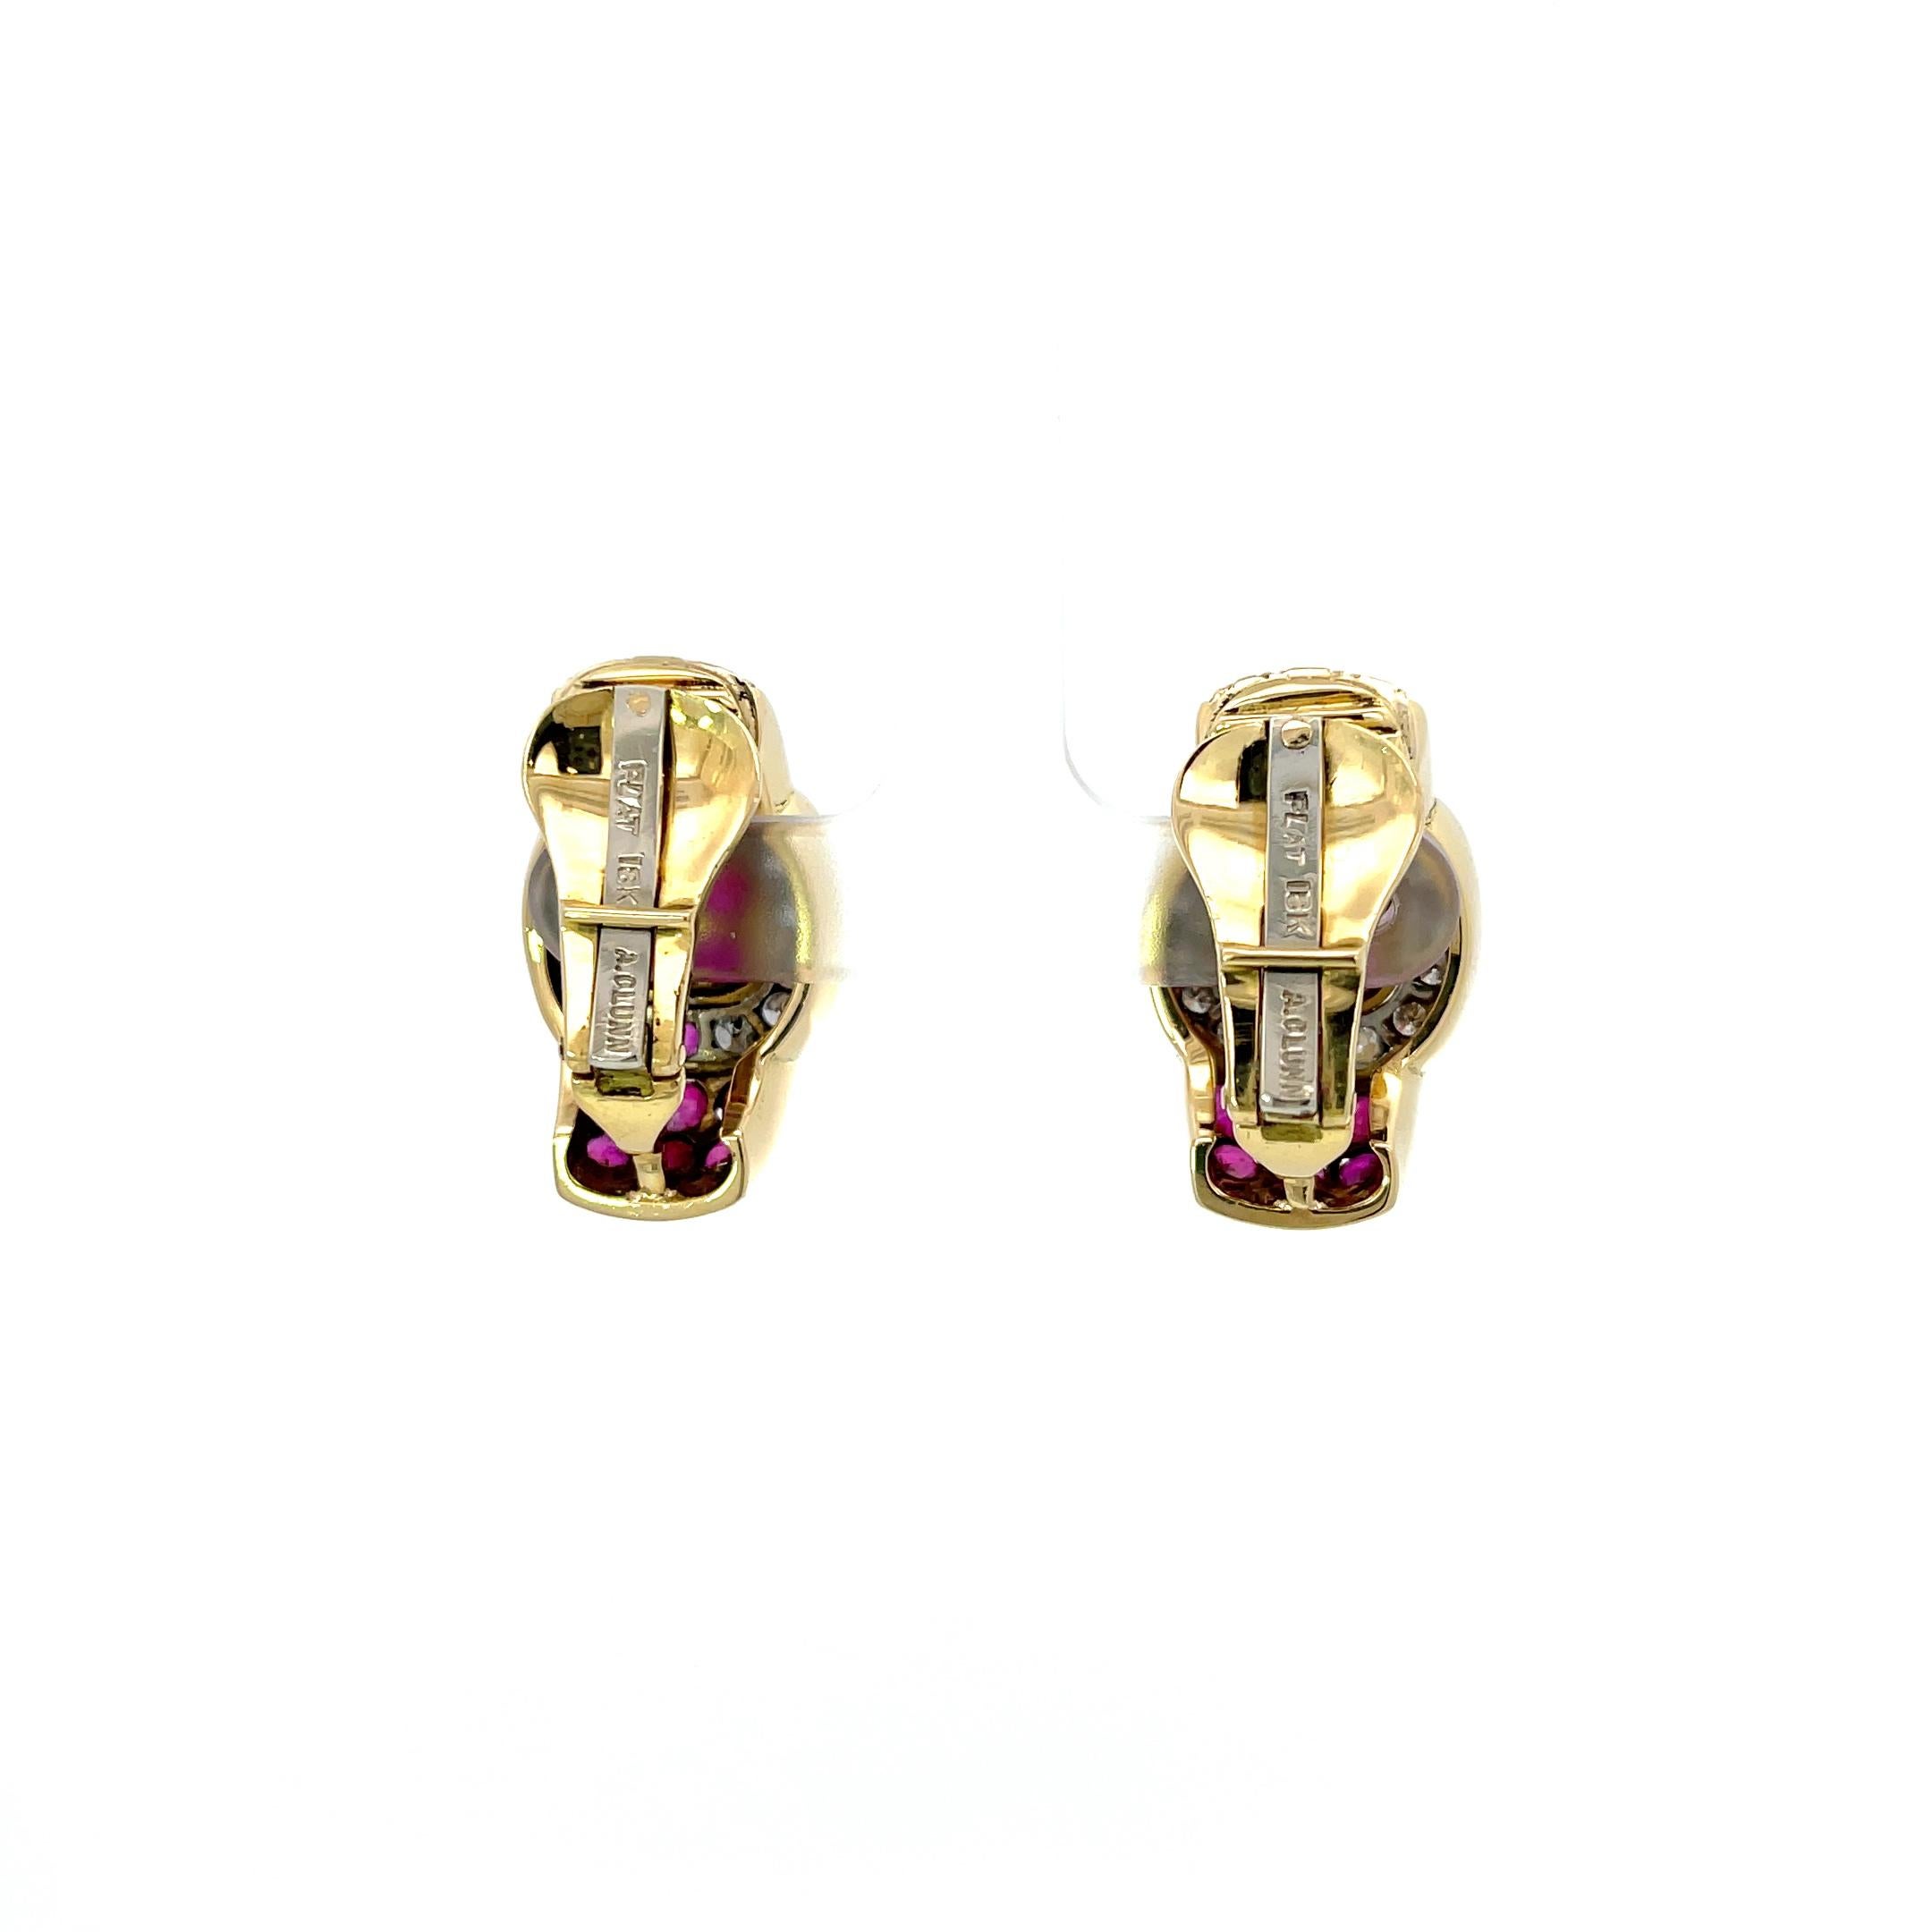 Andrew Clunn Ruby and Diamond Clip-on Earrings in 18K Yellow Gold. The earrings feature approximately 4.9ctw of rubies and 0.70ctw of diamonds. 
1